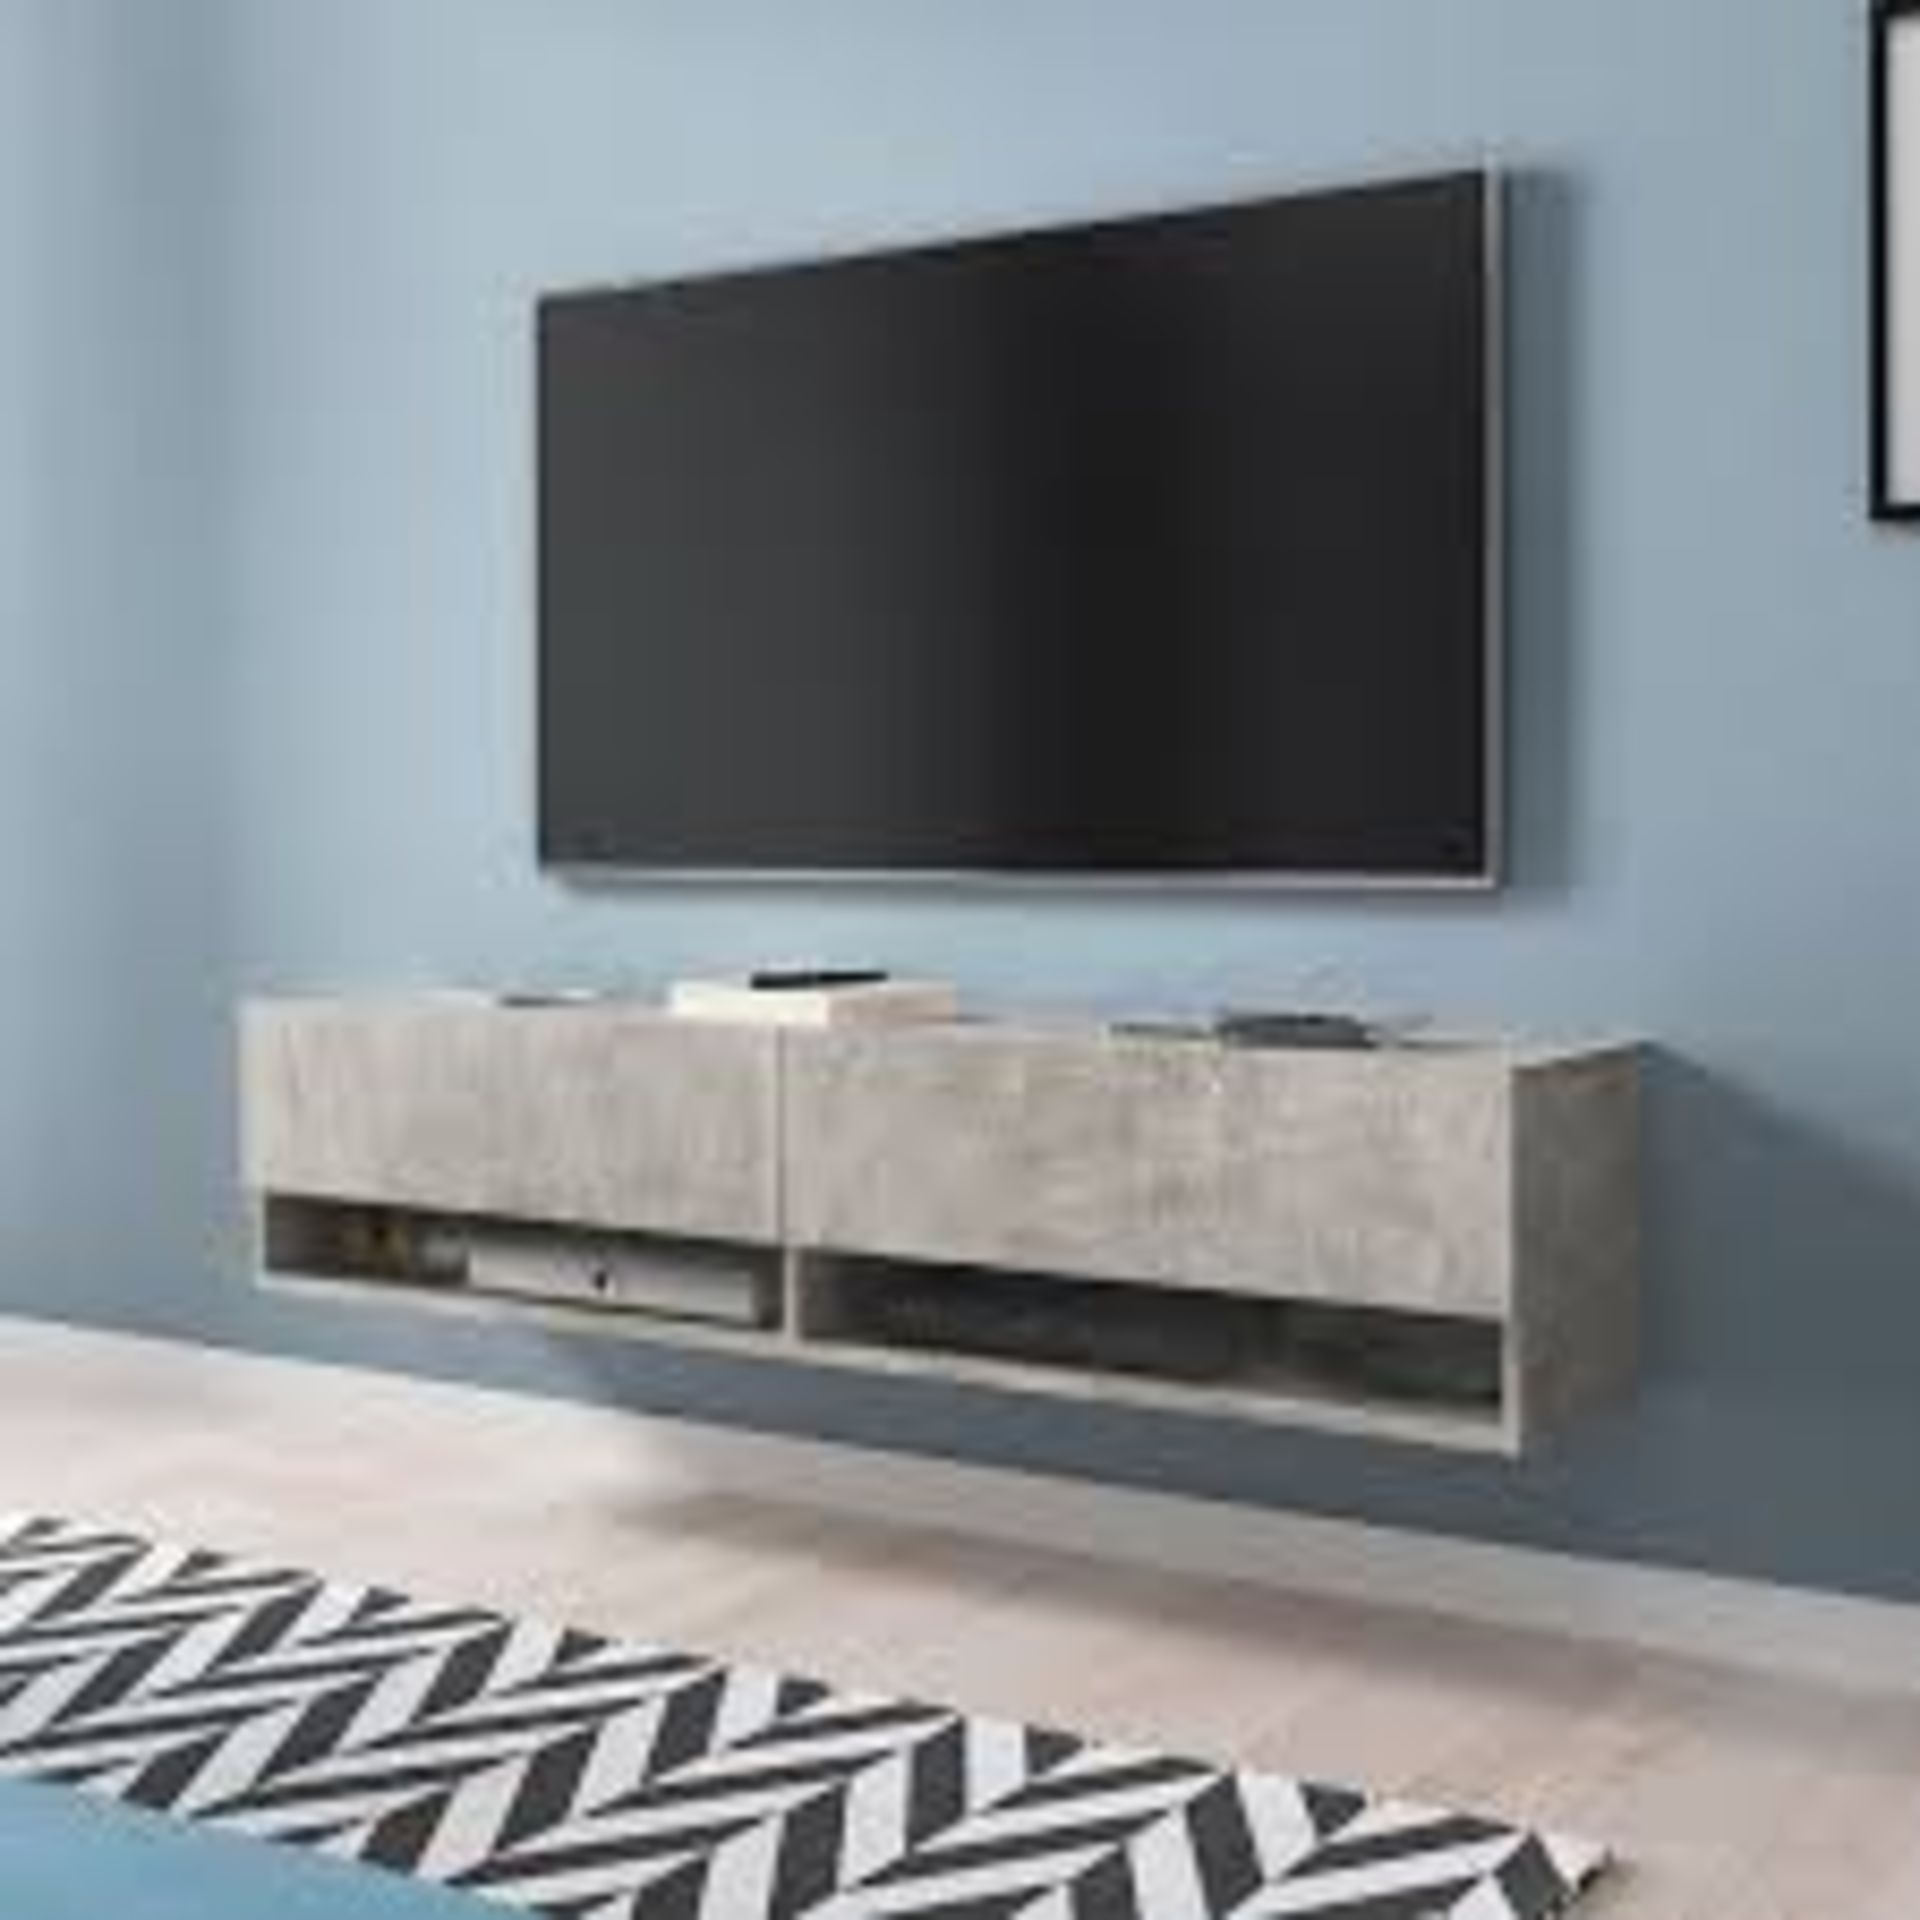 Boxed Selsey 48" Wanda TV Stand RRP £110 (18528) (Pictures Are For Illustration Purposes Only) (